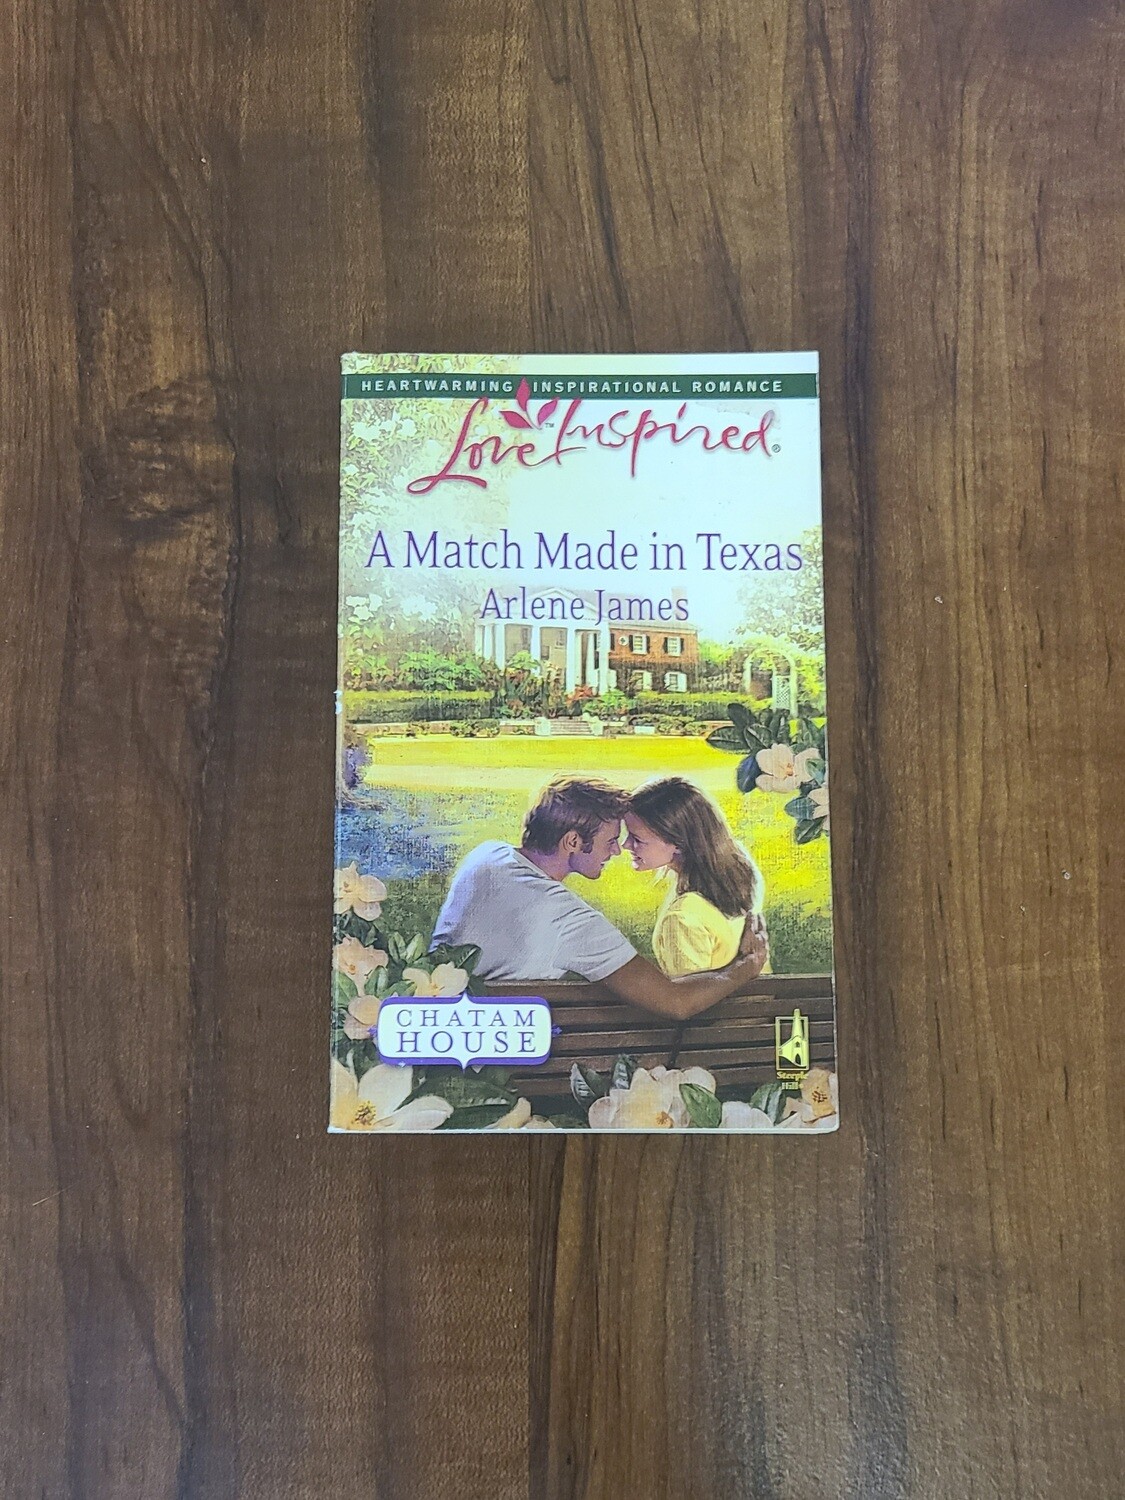 A Match Made in Texas by Arlene James